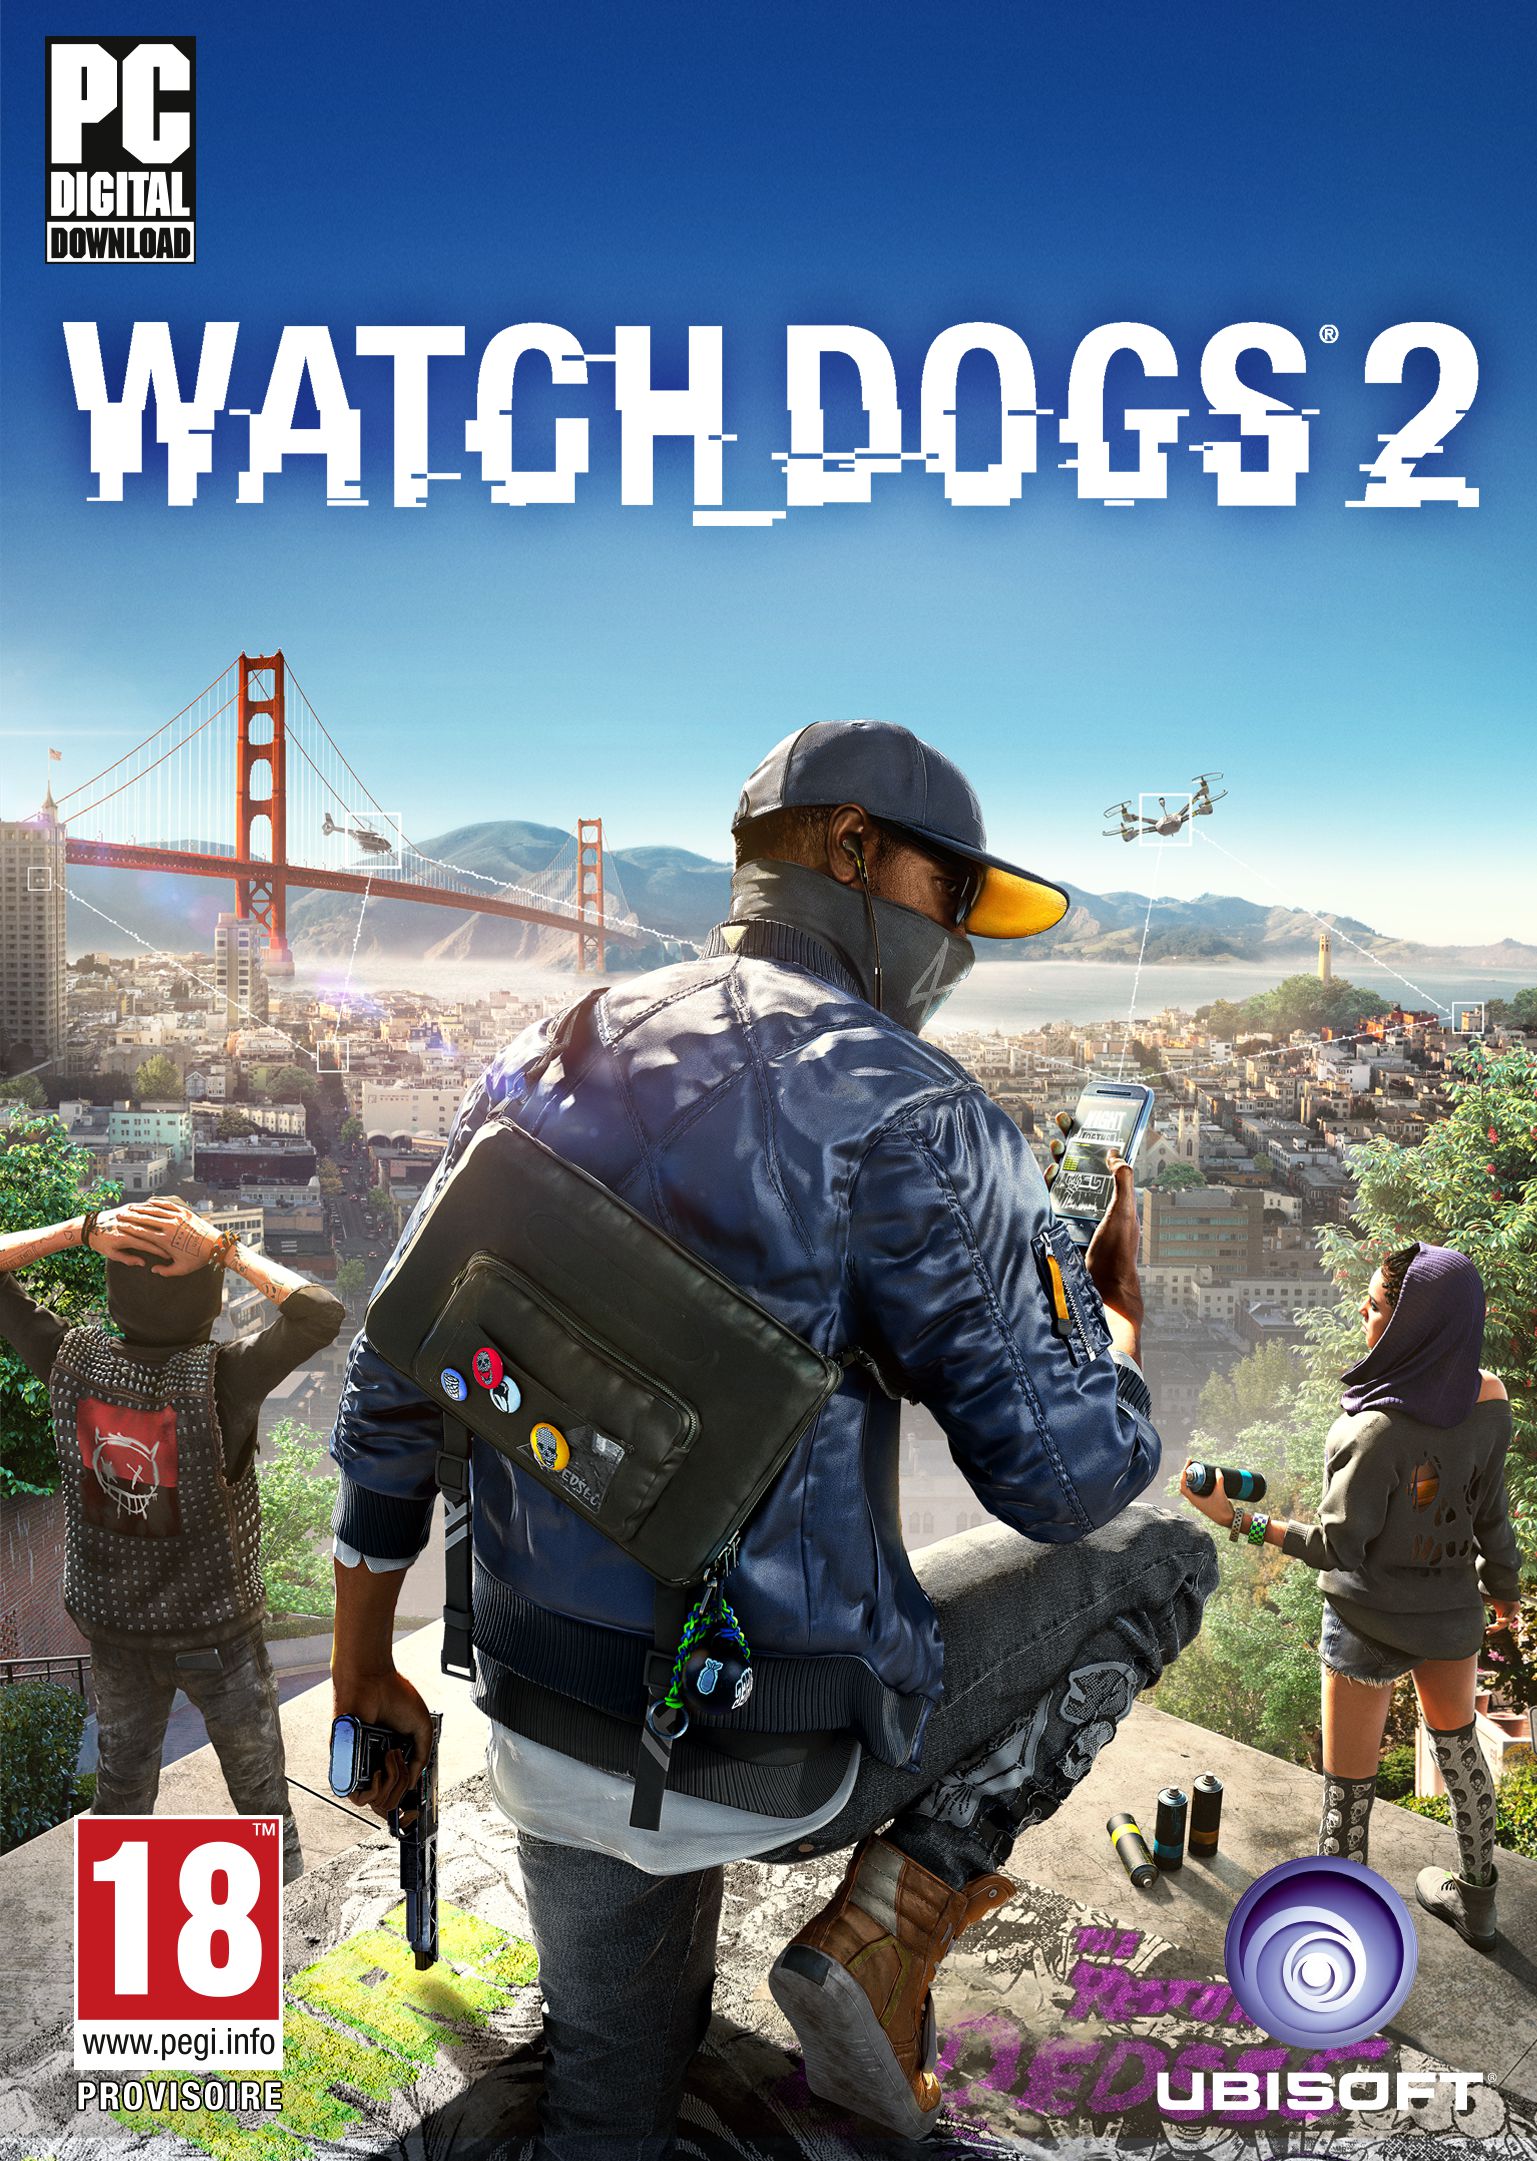 watch dogs 2 pc benchmarks